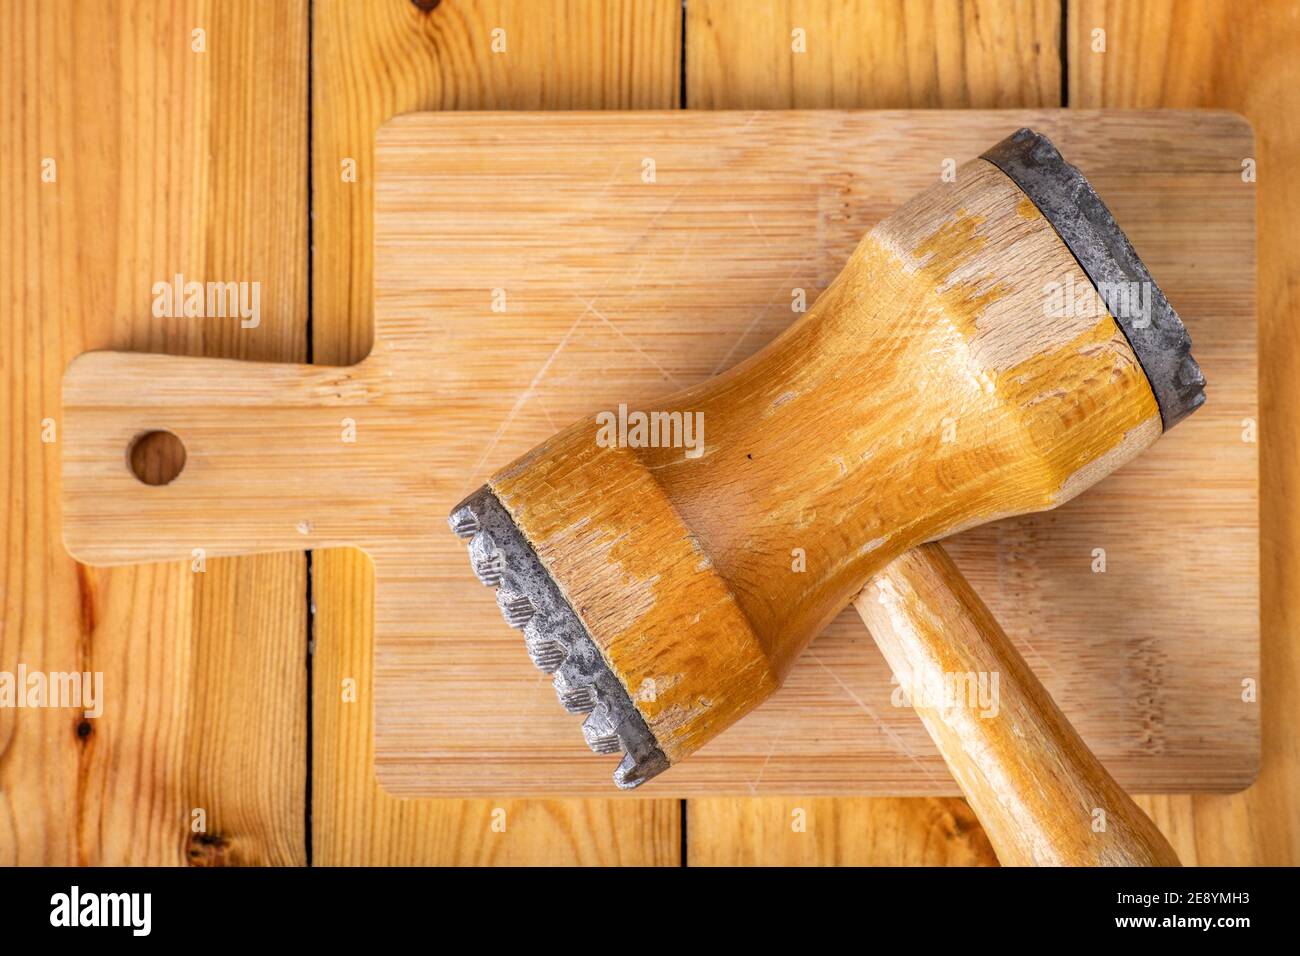 Wooden meat grinder on a chopping board. Wooden kitchen utensils on the kitchen table. Light background. Stock Photo